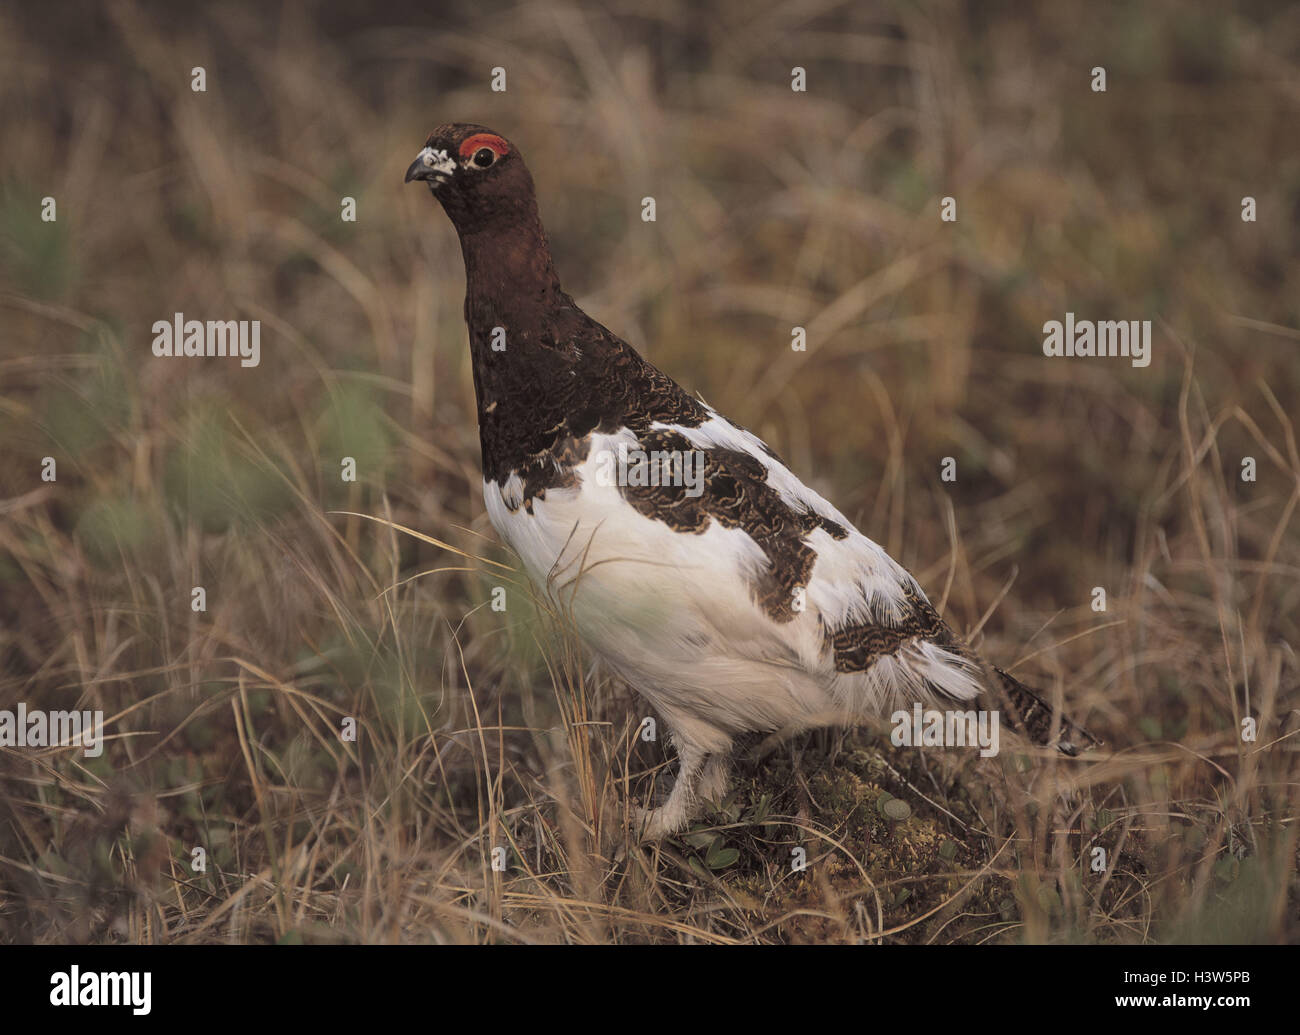 Moore's snow tap, Lagopus lagopus, meadow, stand animal, animals, grouse, bird, birds, chicken, poultry, ptarmigan, ptarmigans, Lagopus, Rau's foot poultry, wild animal, wild animals, gallinaceous birds, gallinaceous bird, Galli, Galliformes, animal world Stock Photo